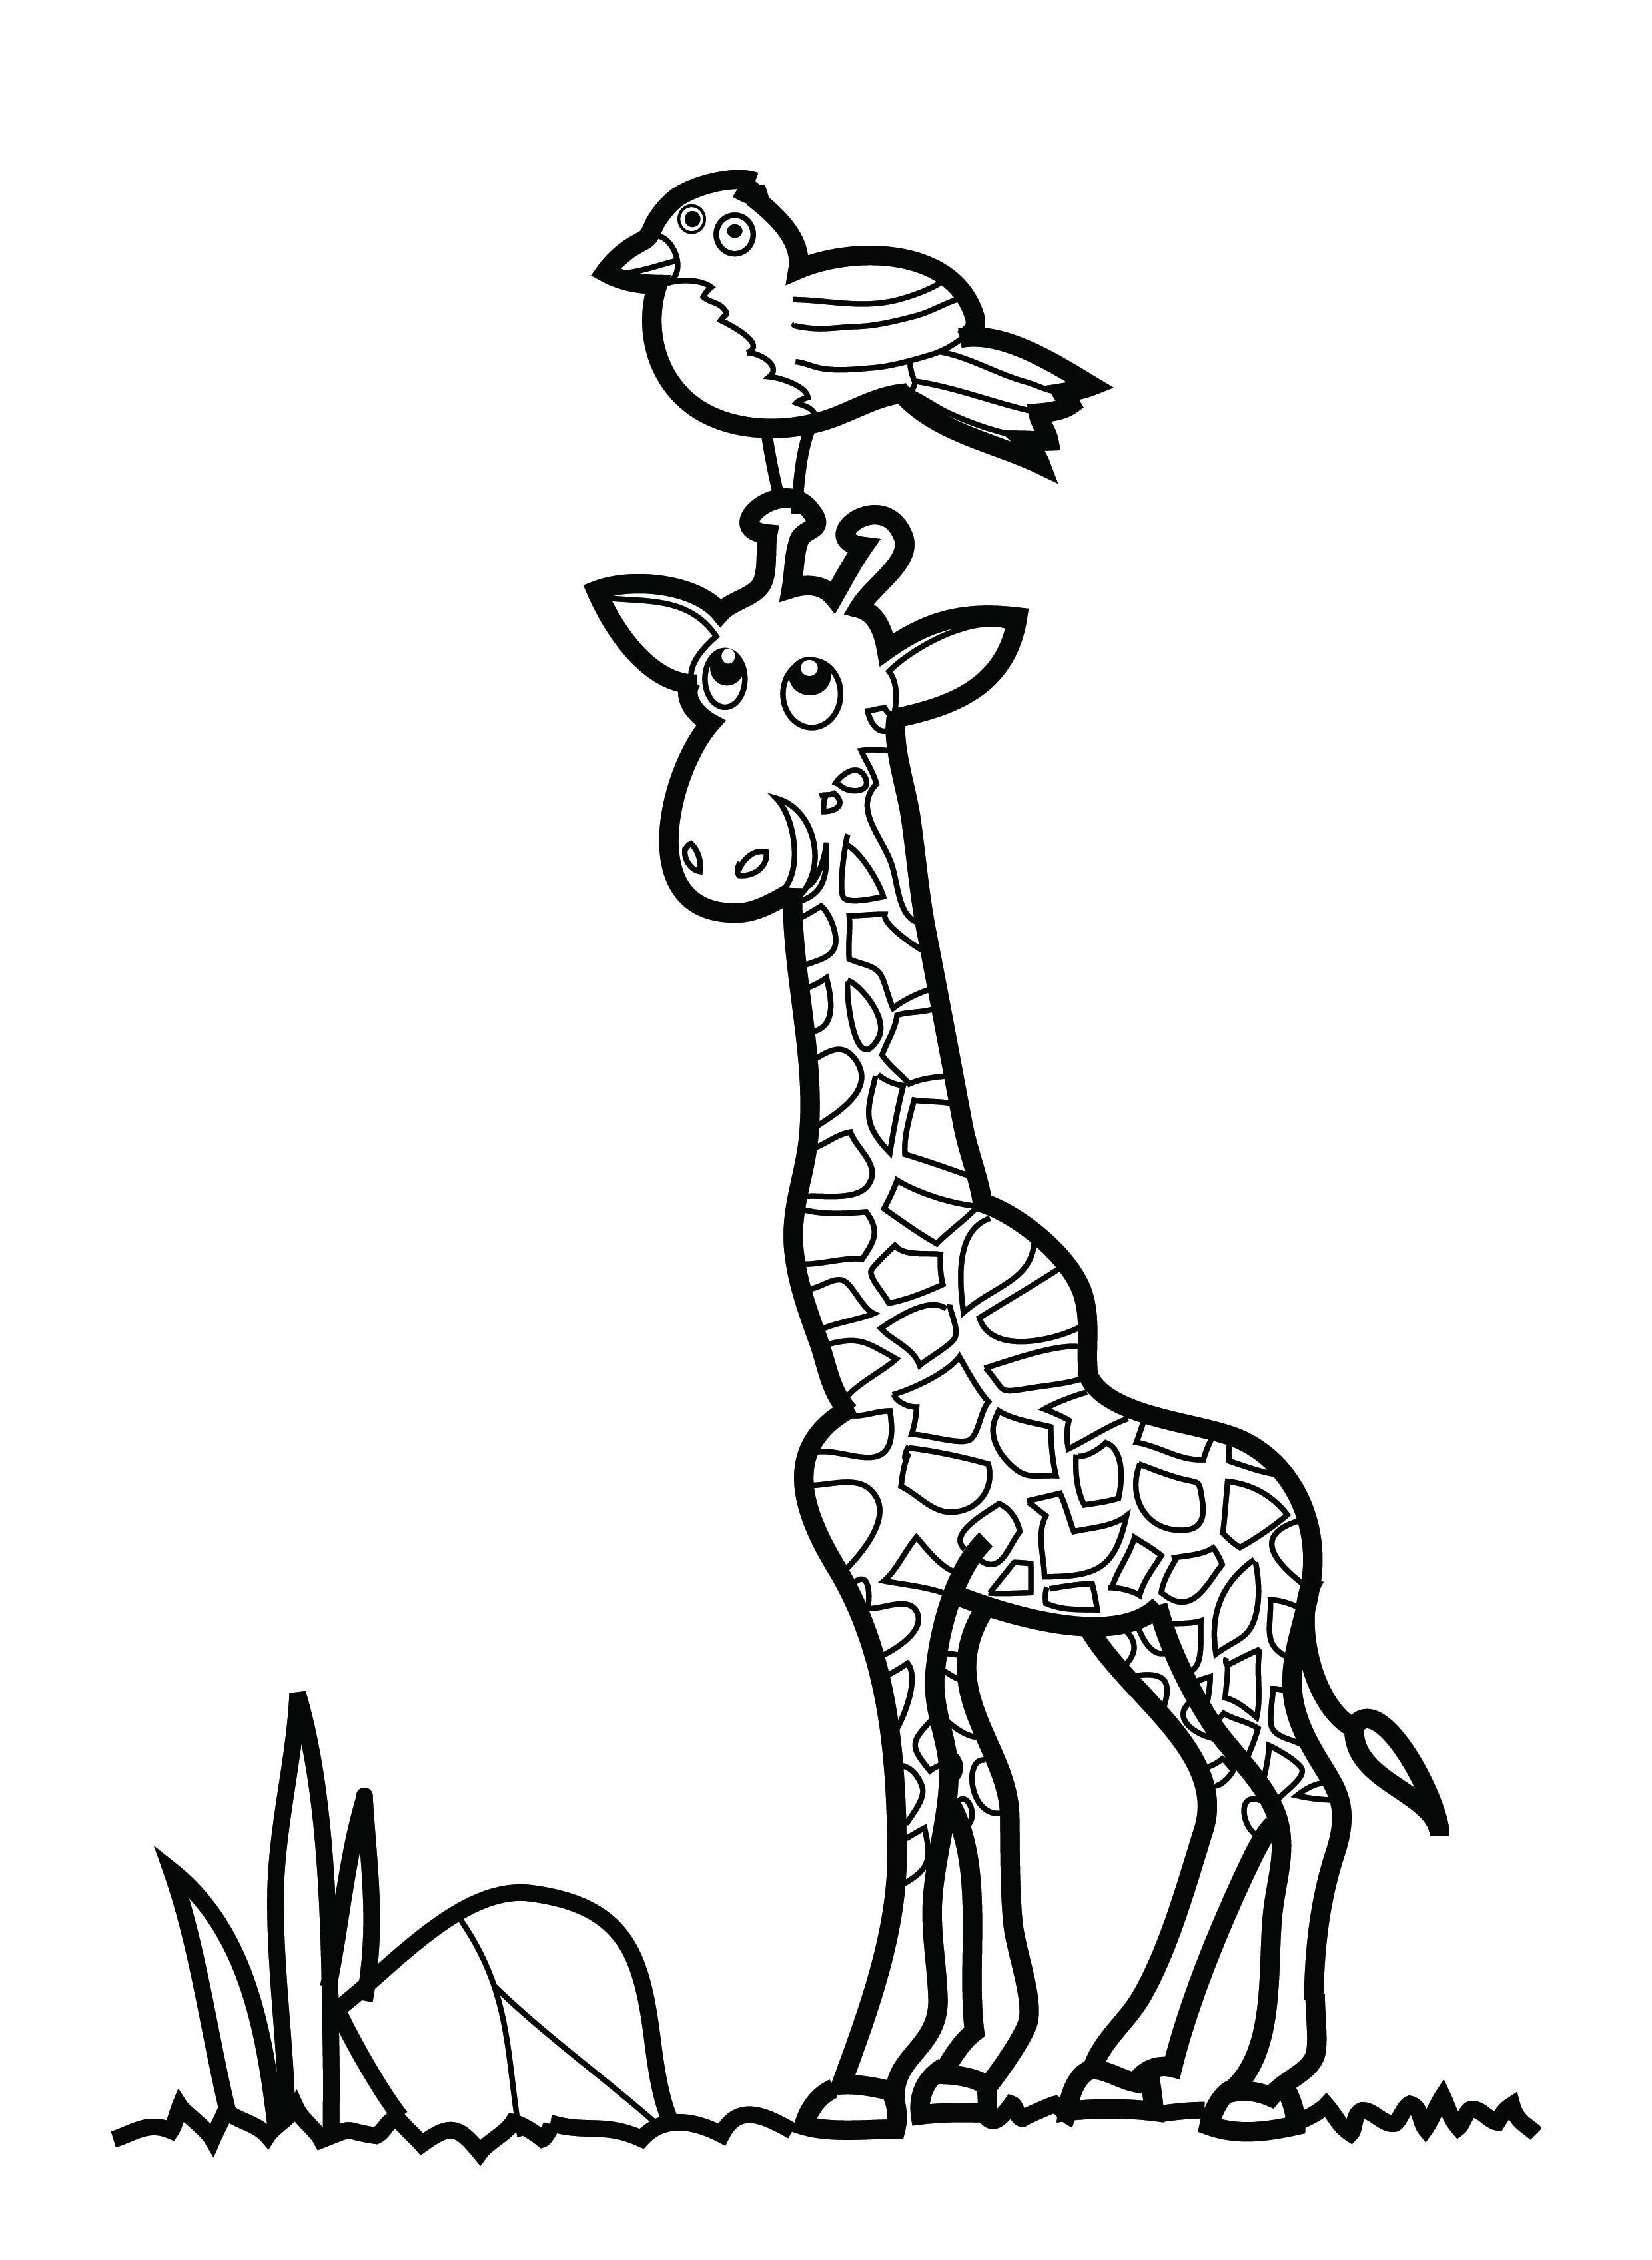 Coloring Page of Giraffe